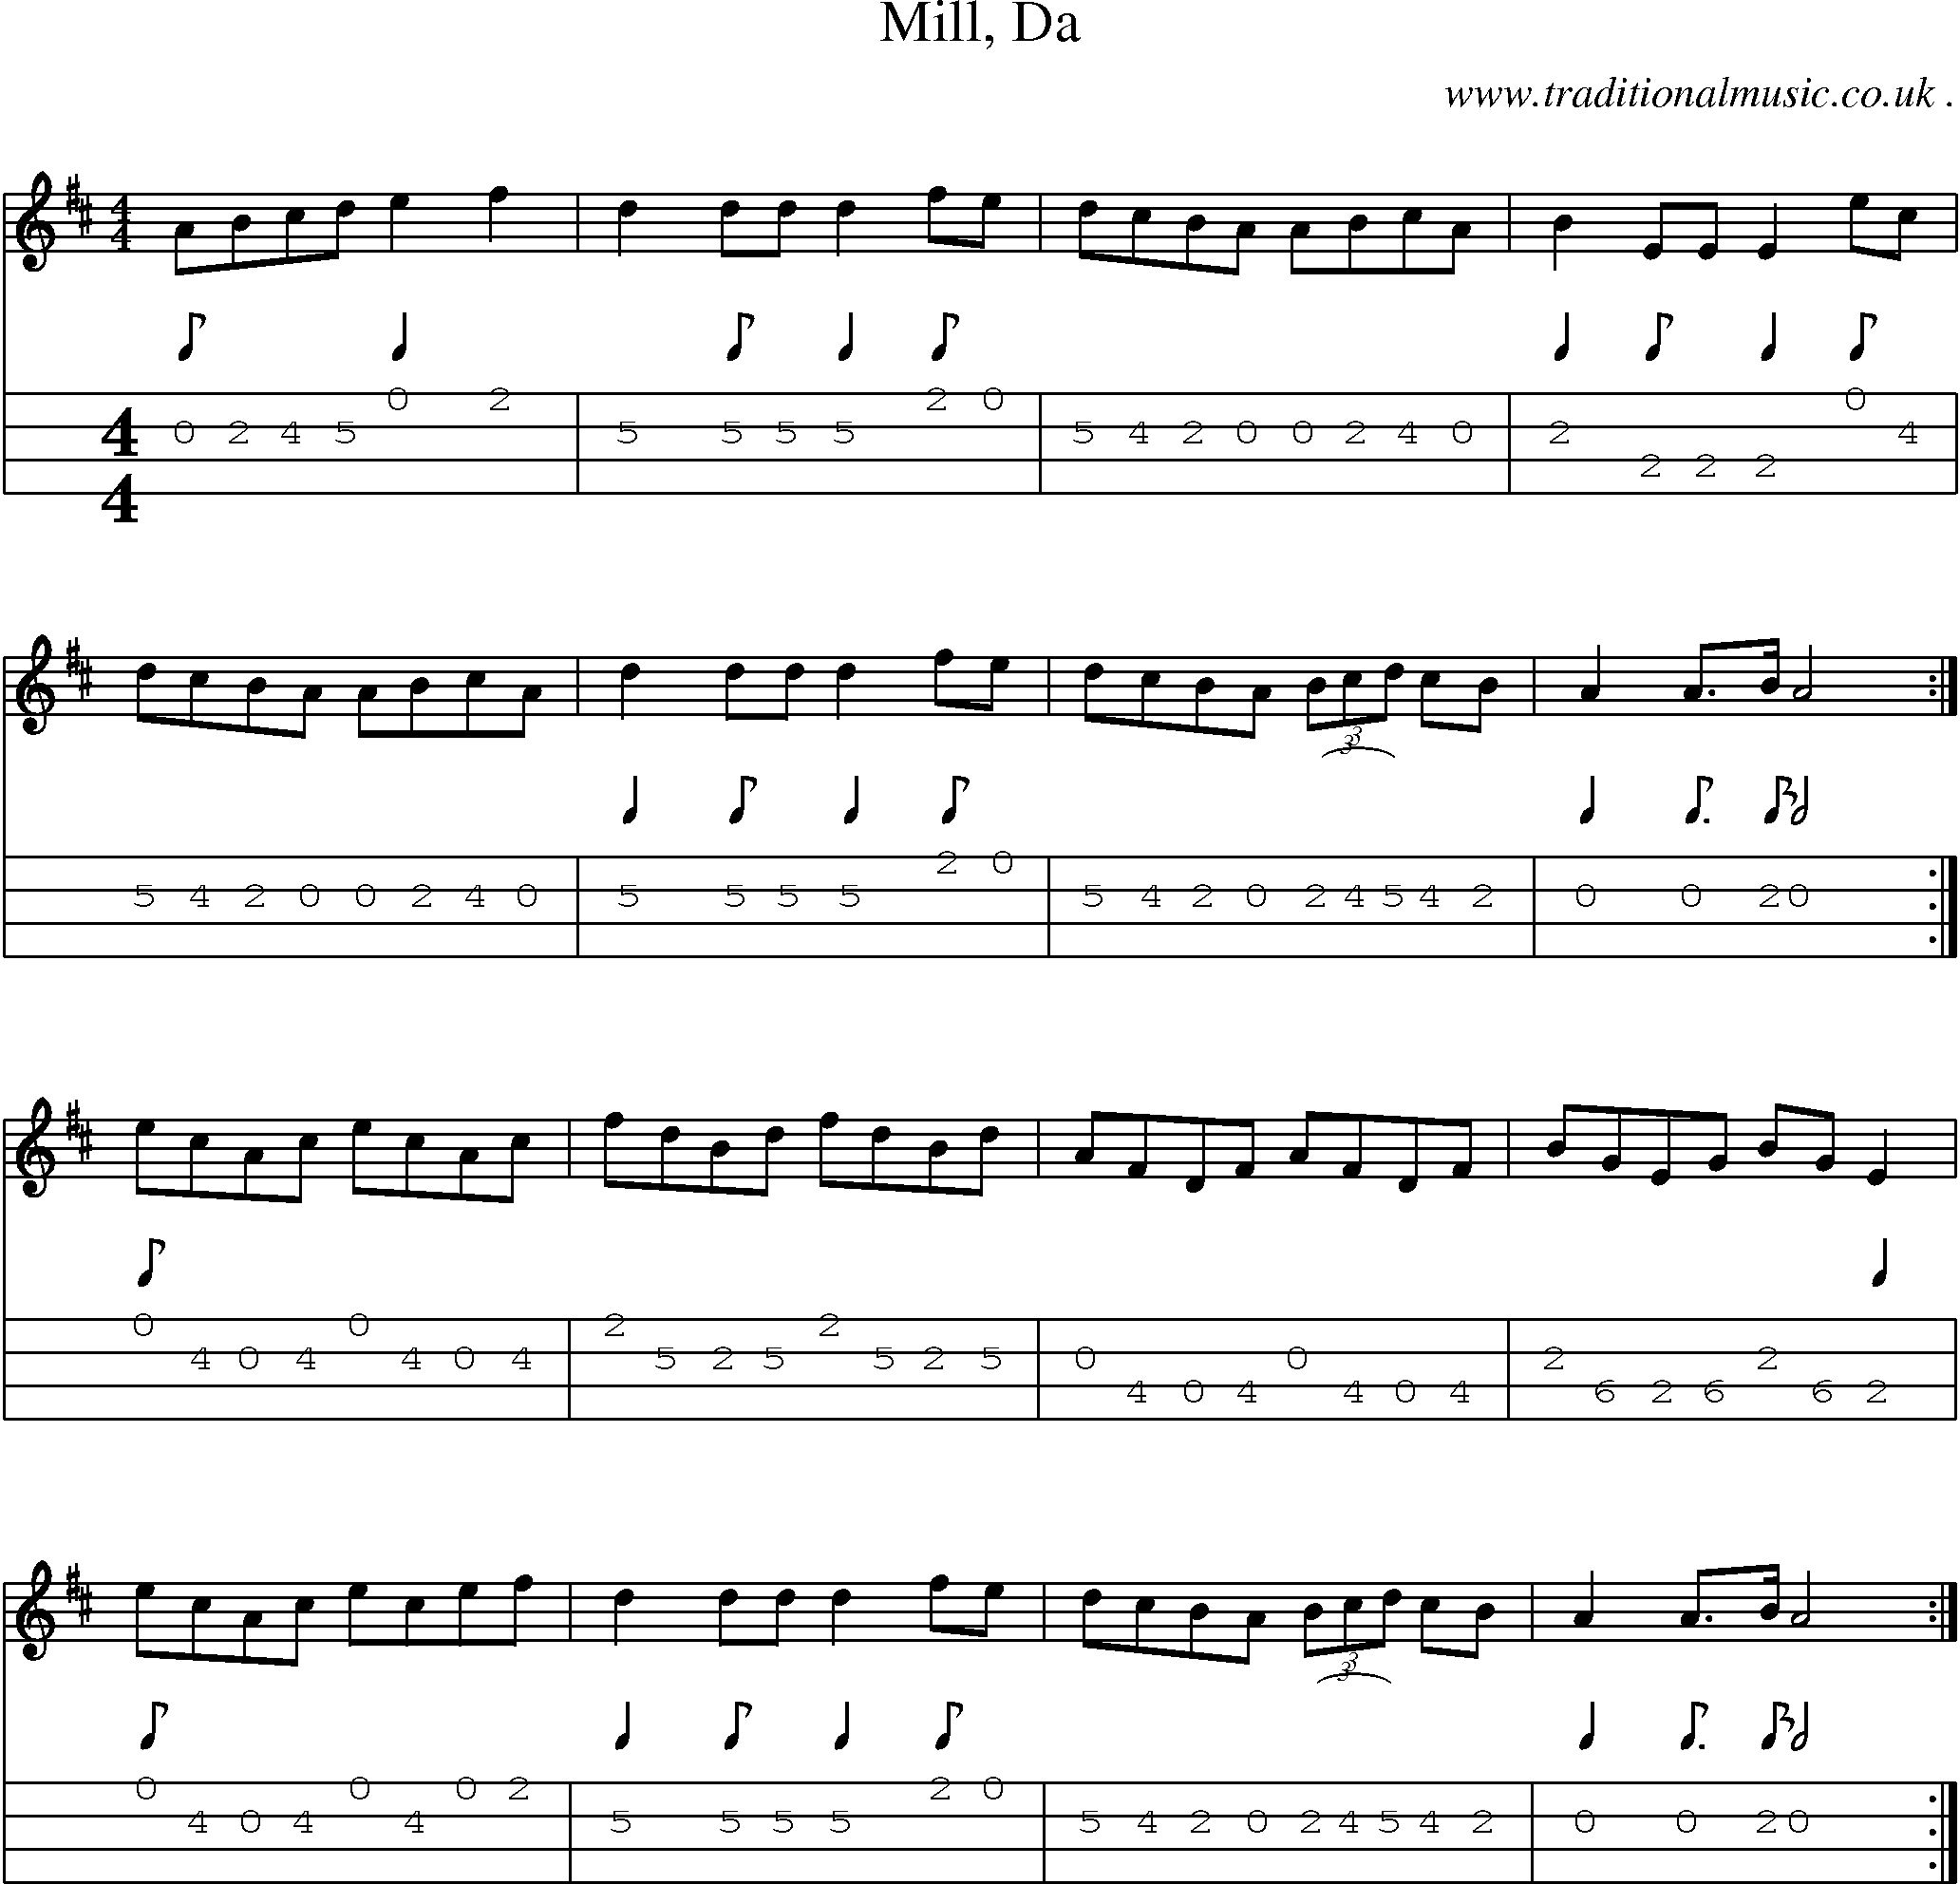 Sheet-music  score, Chords and Mandolin Tabs for Mill Da